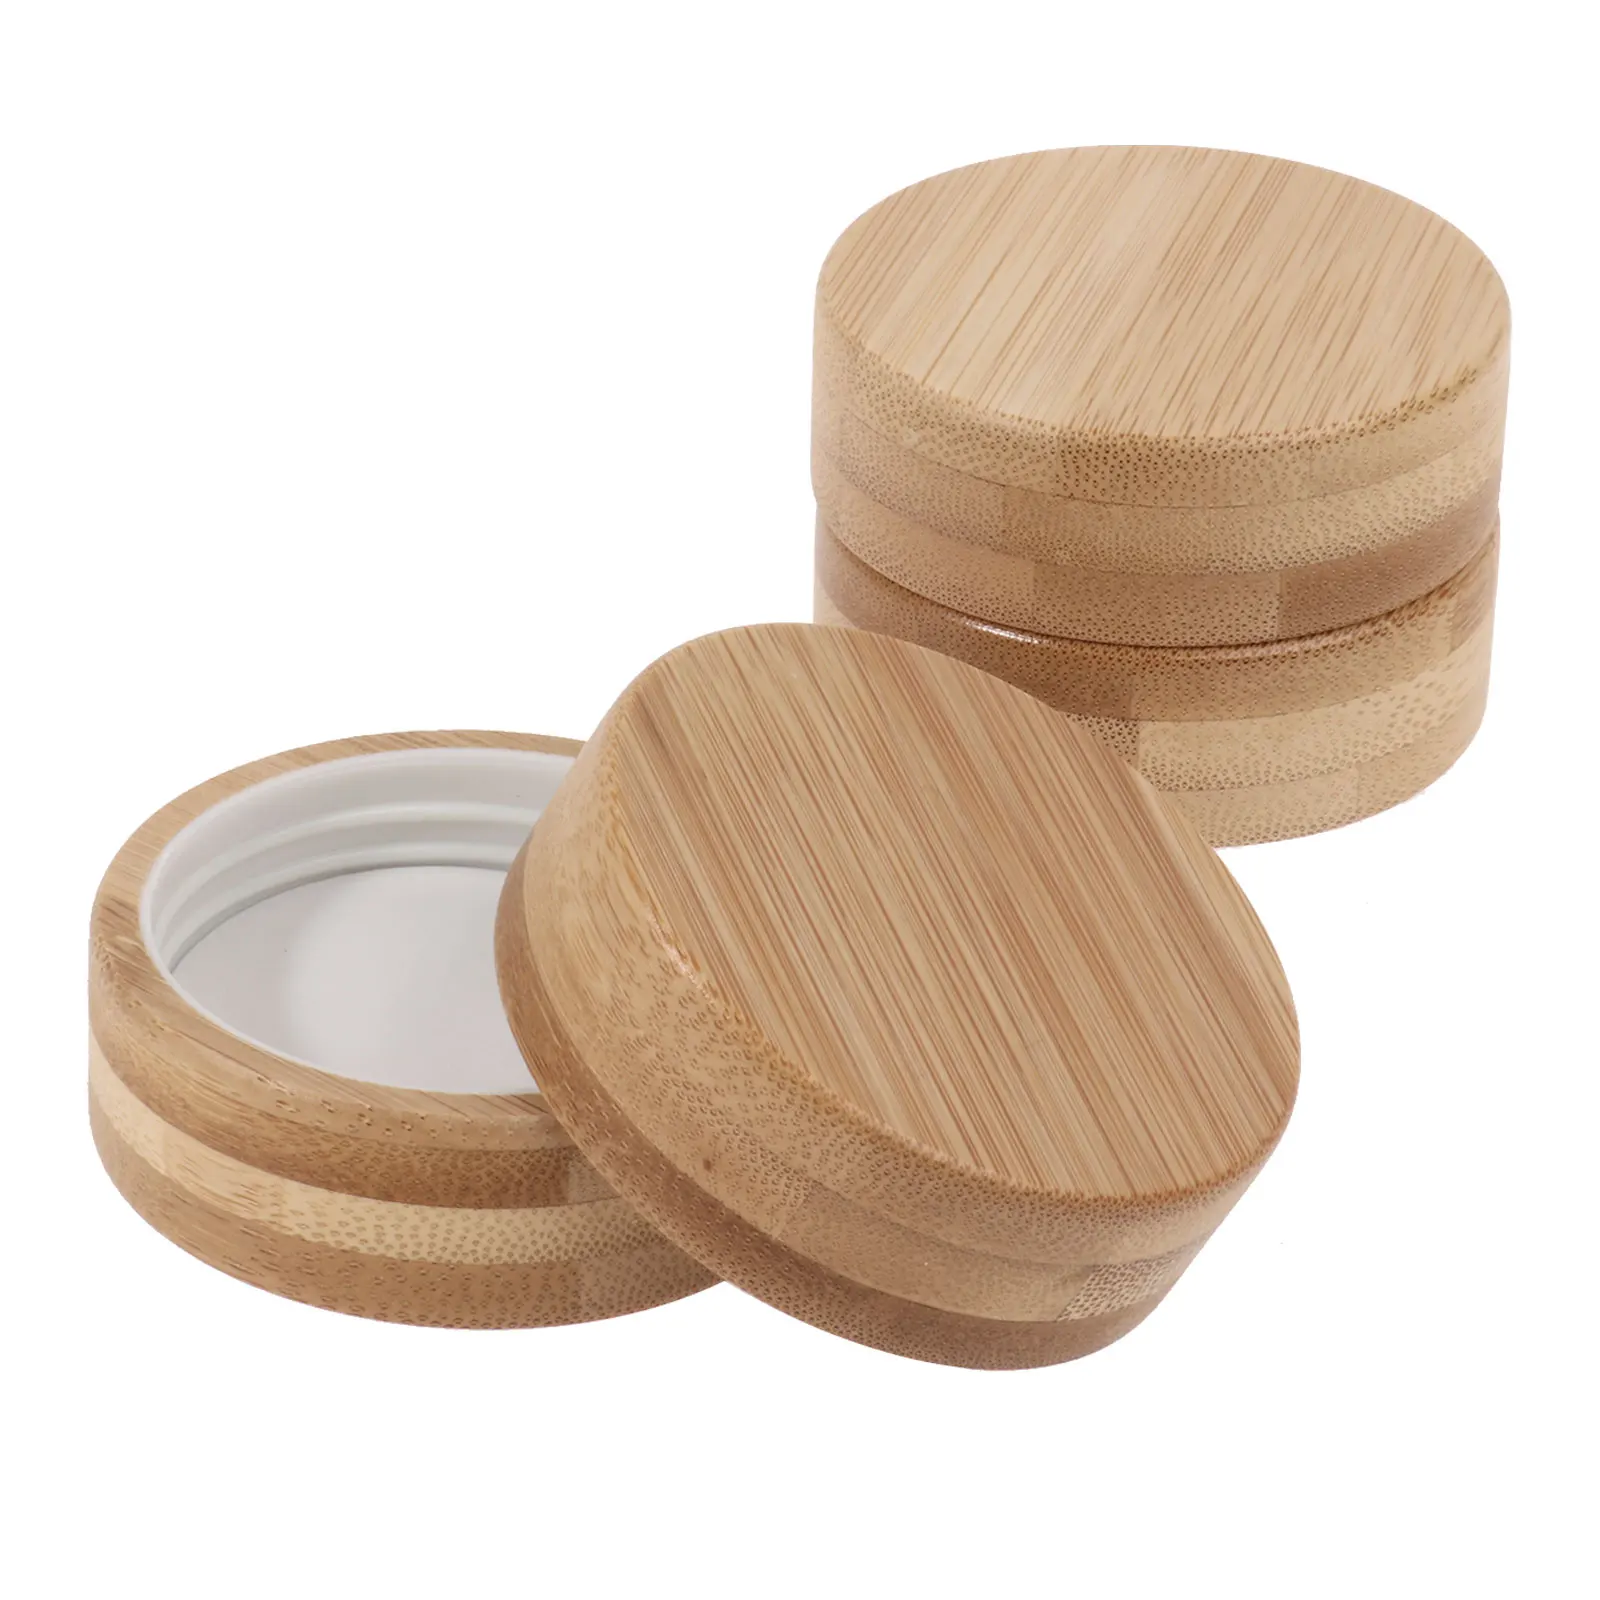 Bamboo Mason Jar Storage Canning Lids Drinking Cup Covers Seal P3 